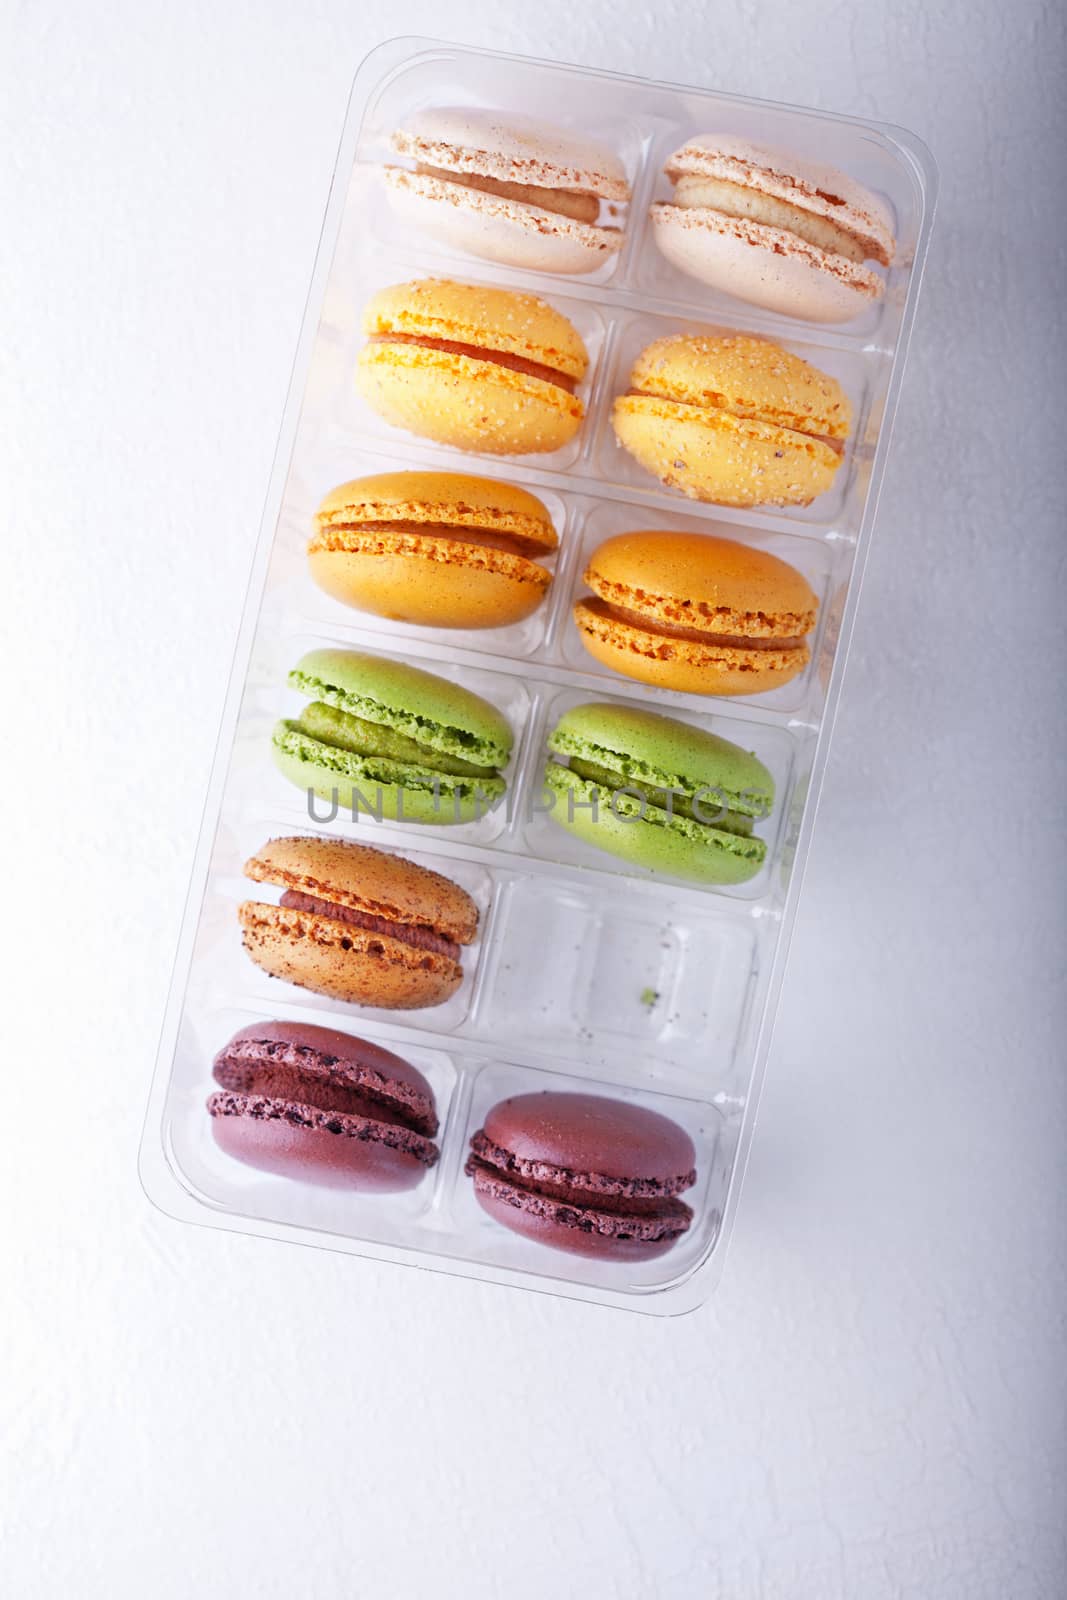 Multicolored Macarons in Box  by supercat67